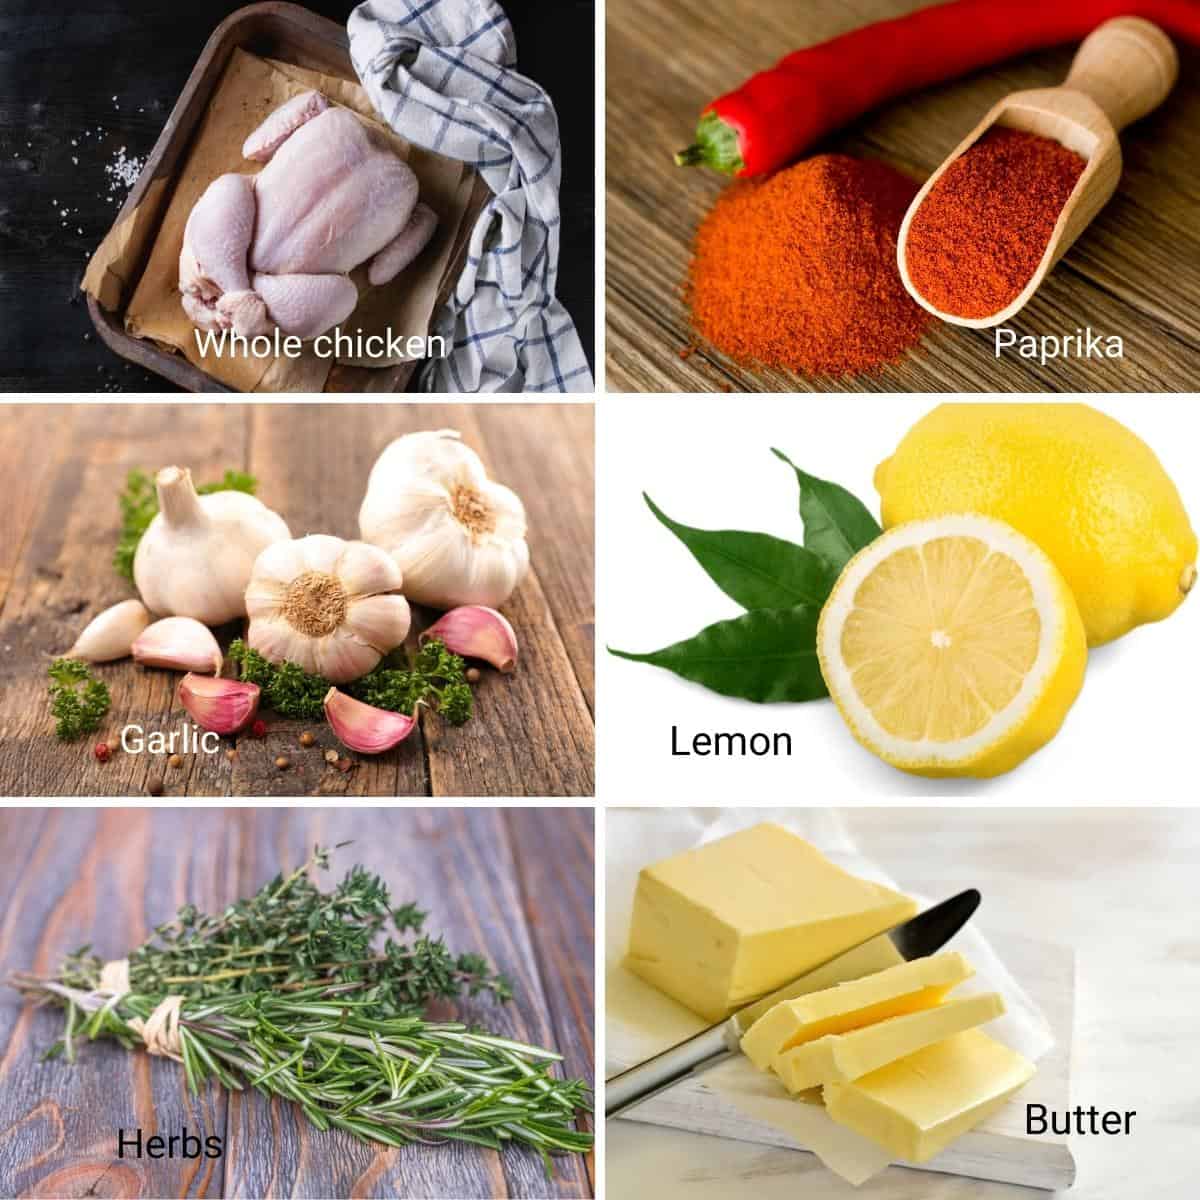 Ingredients for roasting the chicken.